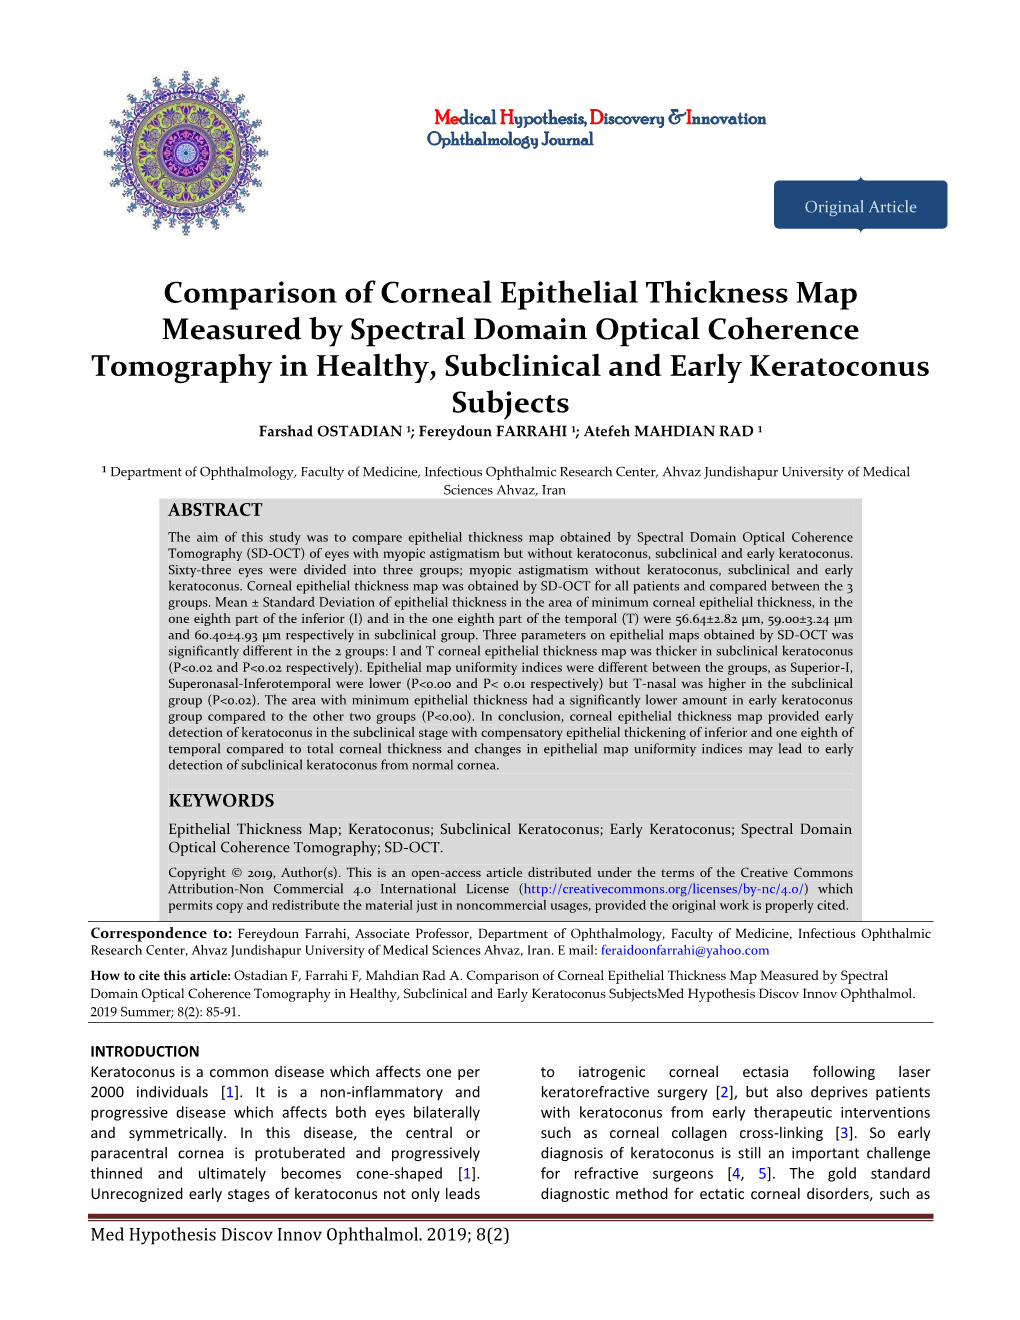 Comparison of Corneal Epithelial Thickness Map Measured By